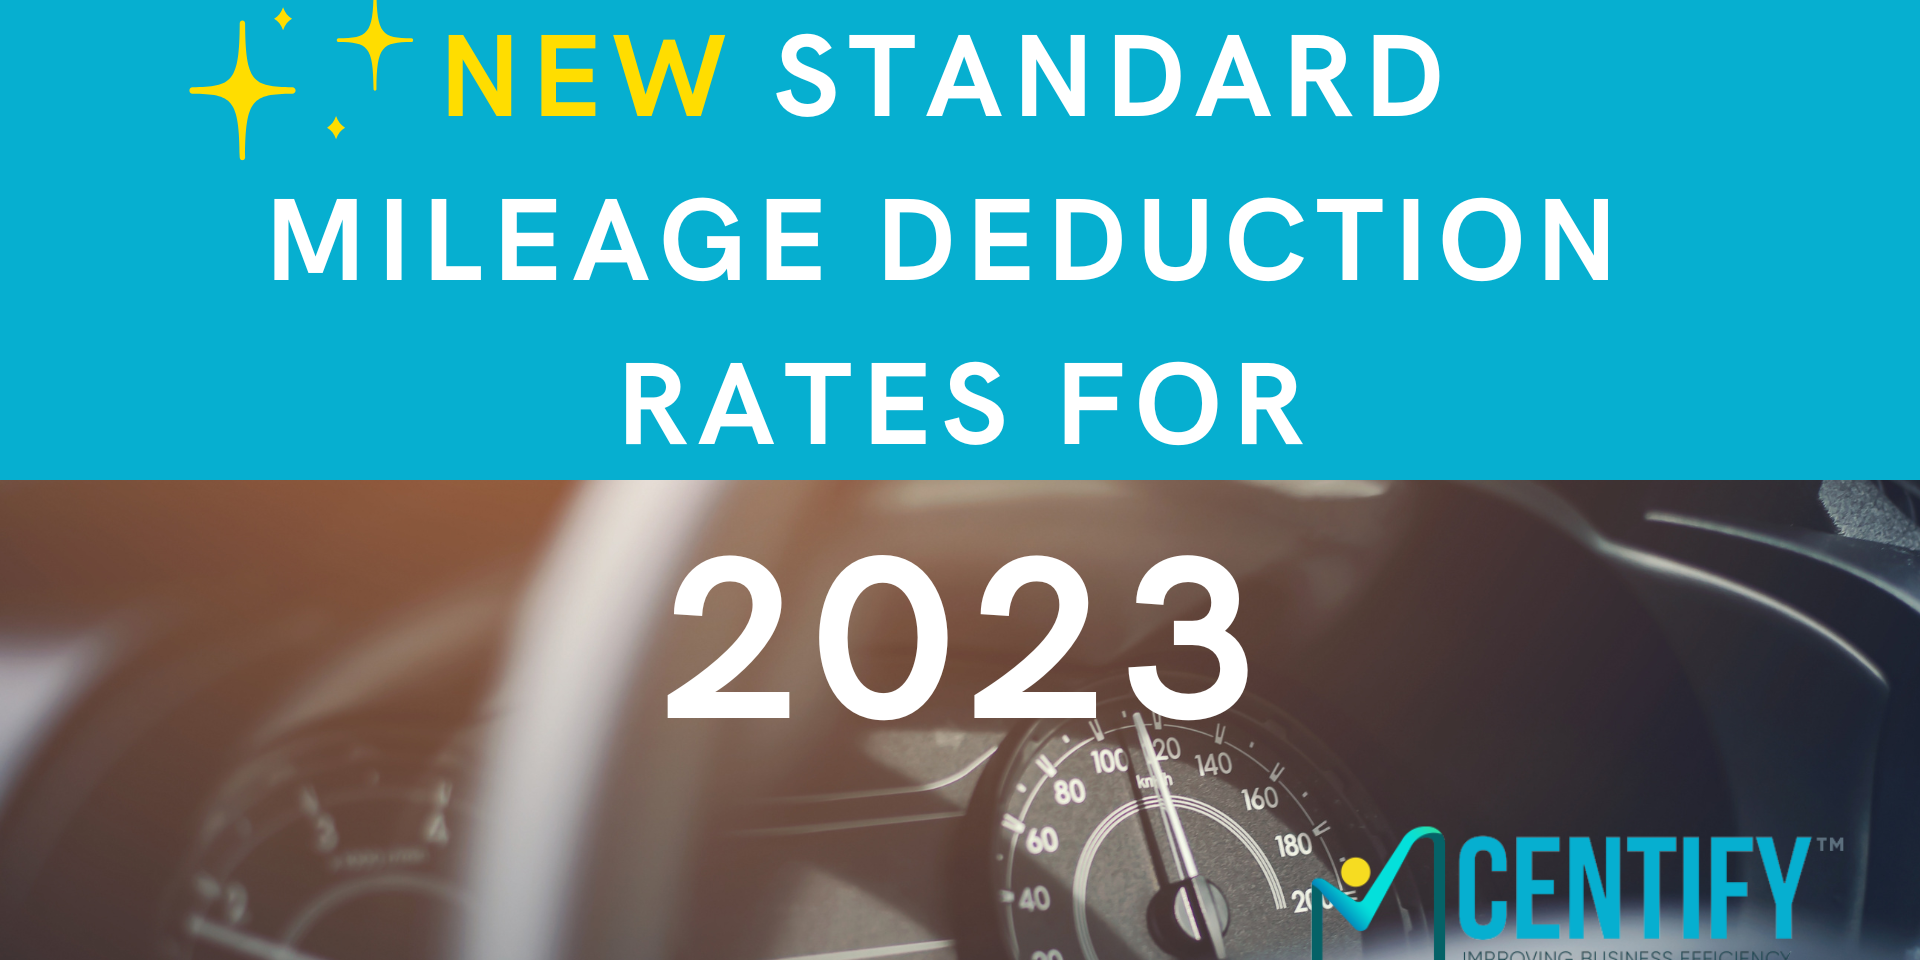 New Standard Mileage Deduction Rates for 2023 CENTIFY™